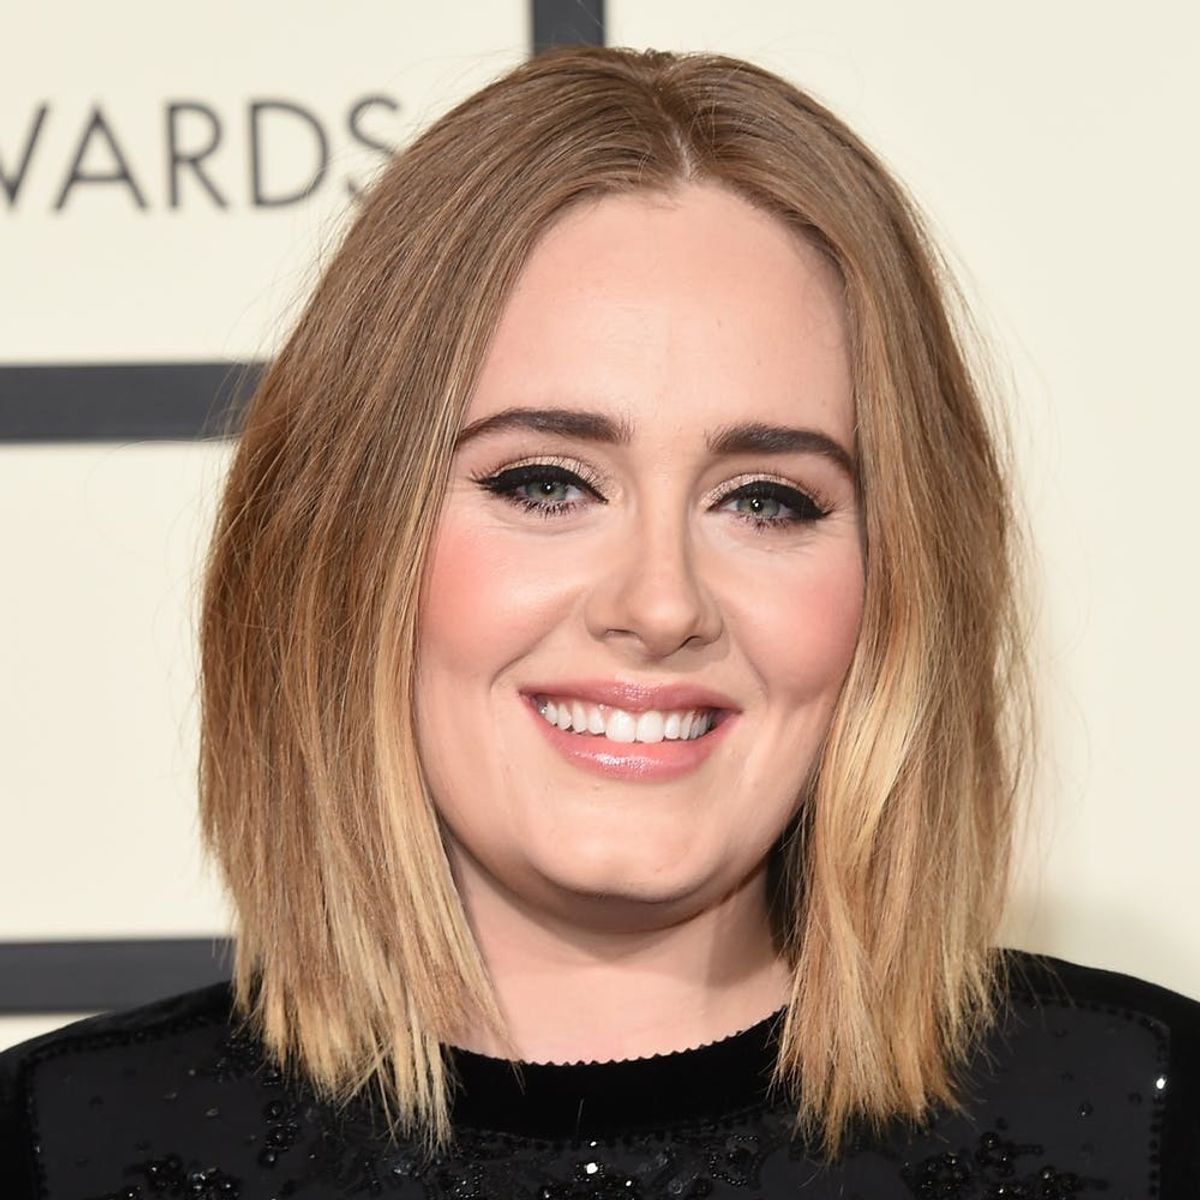 Watch: Adele Just Dropped Her Newest Vid at the Billboard Music Awards